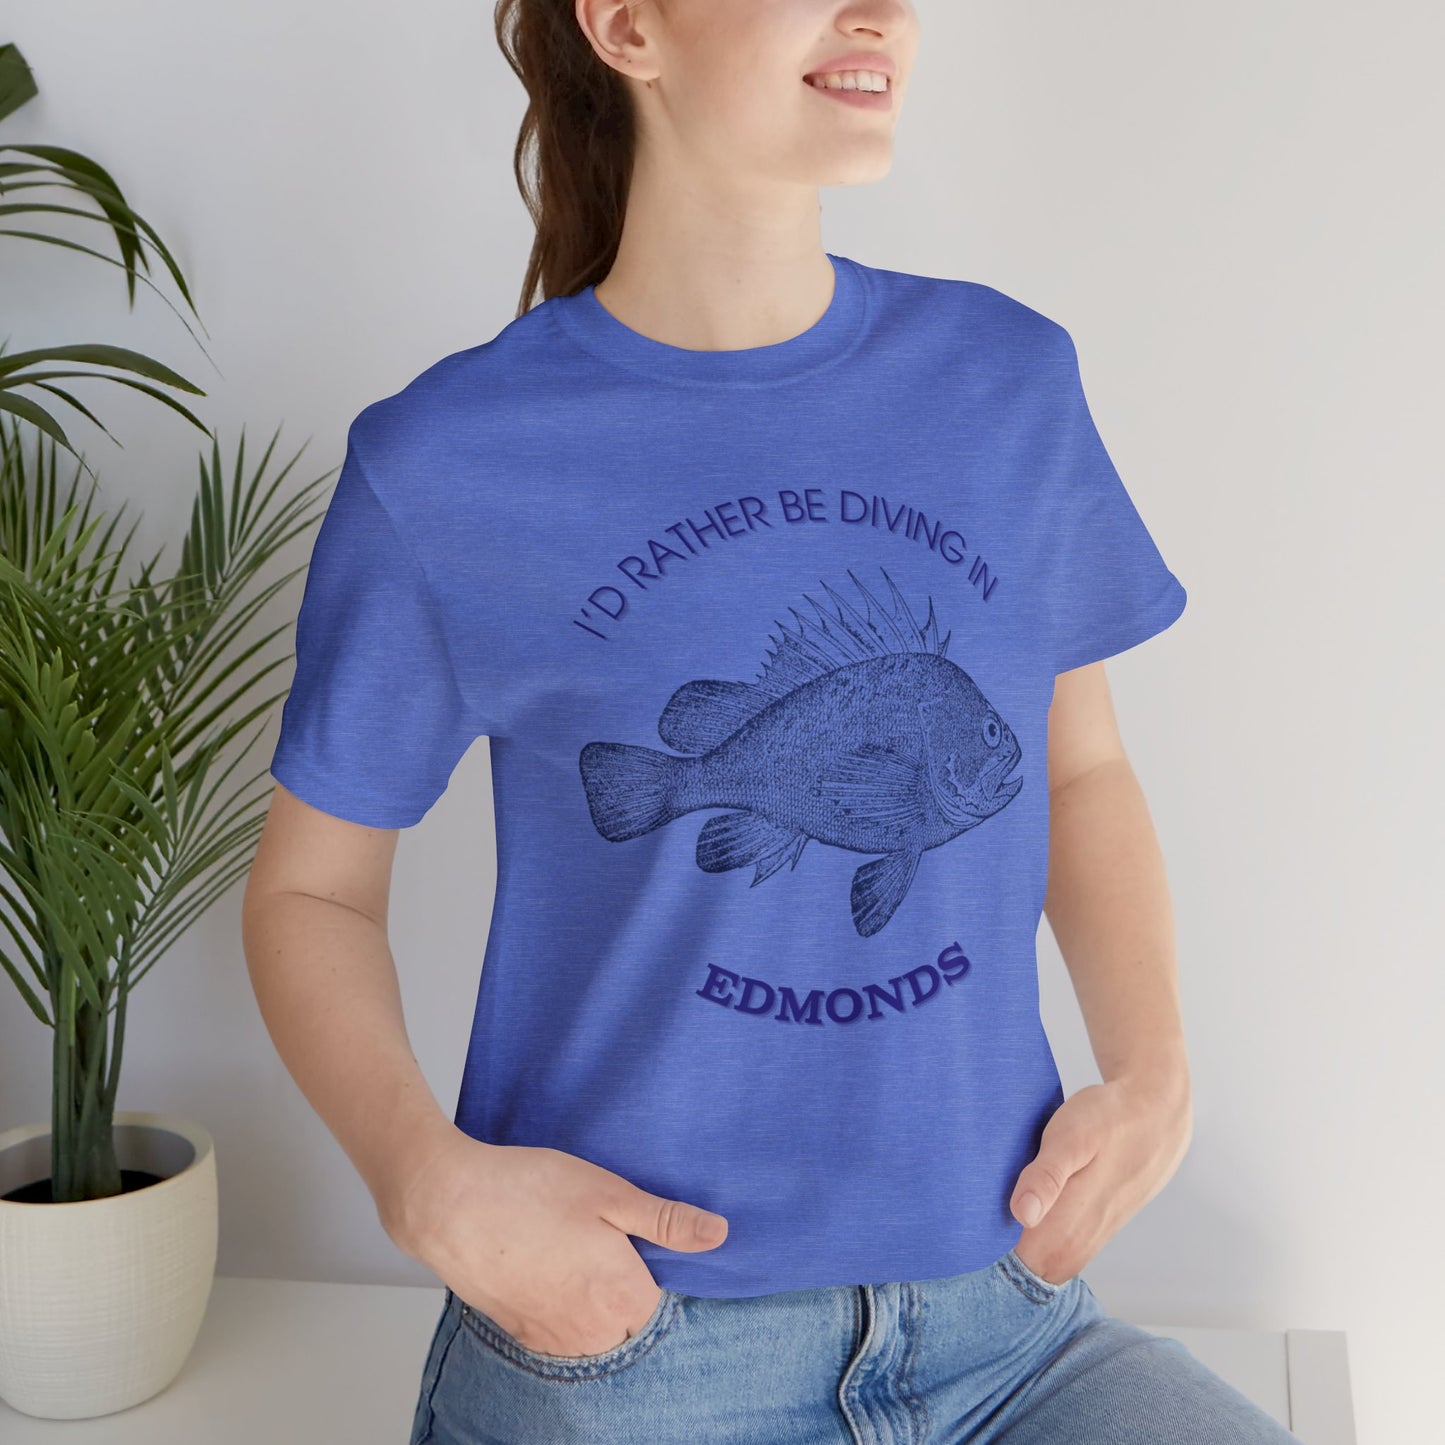 I'd Rather Be Diving in Edmonds T-shirt